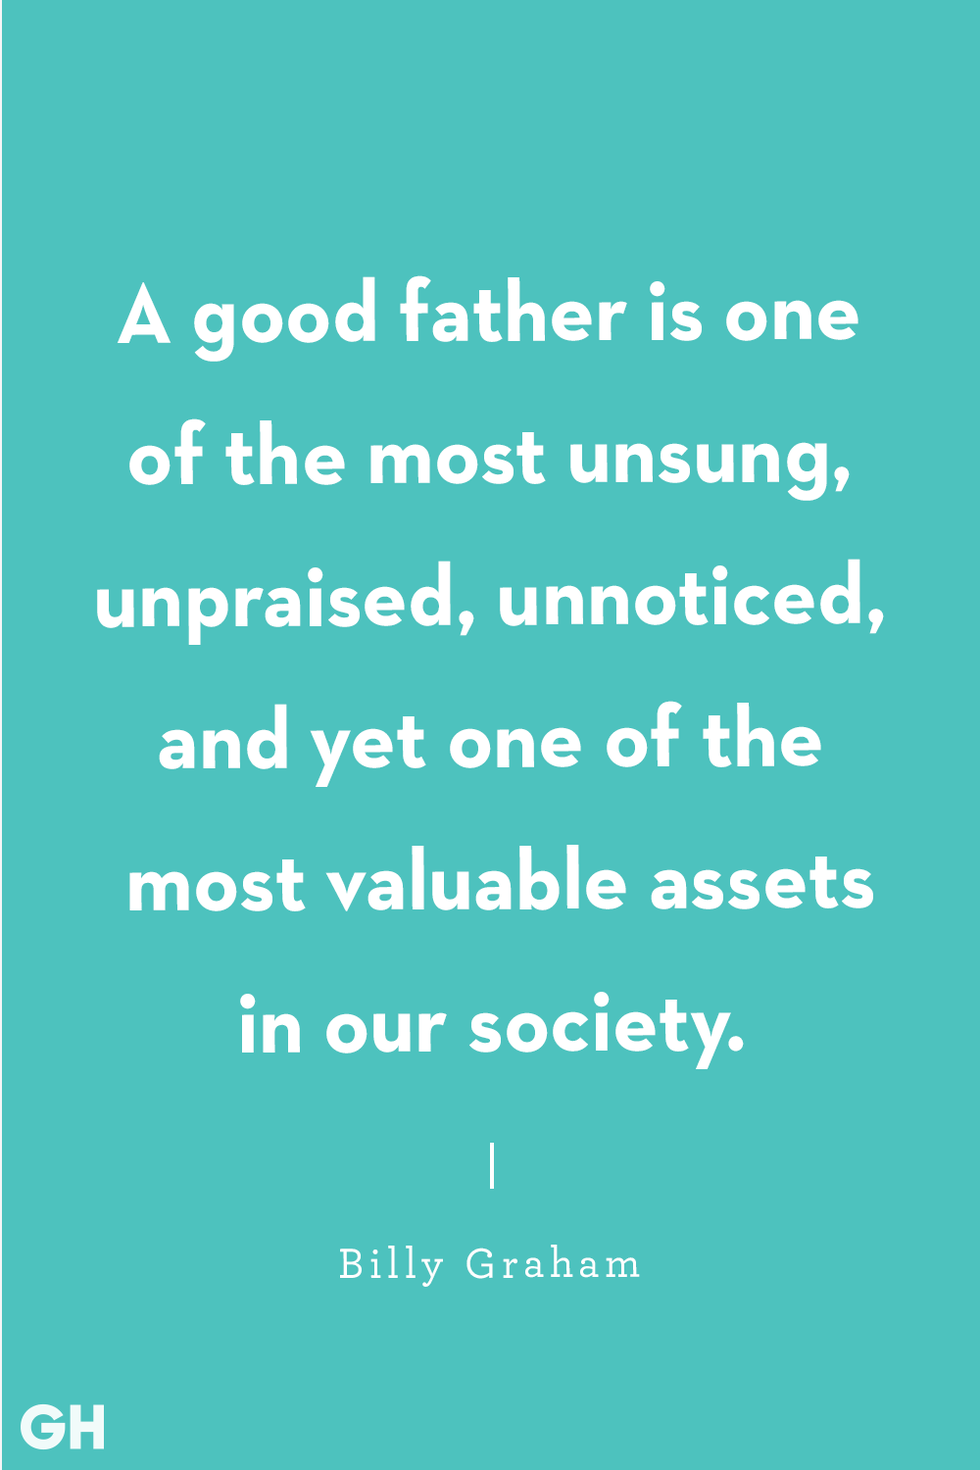 father's day quotes images